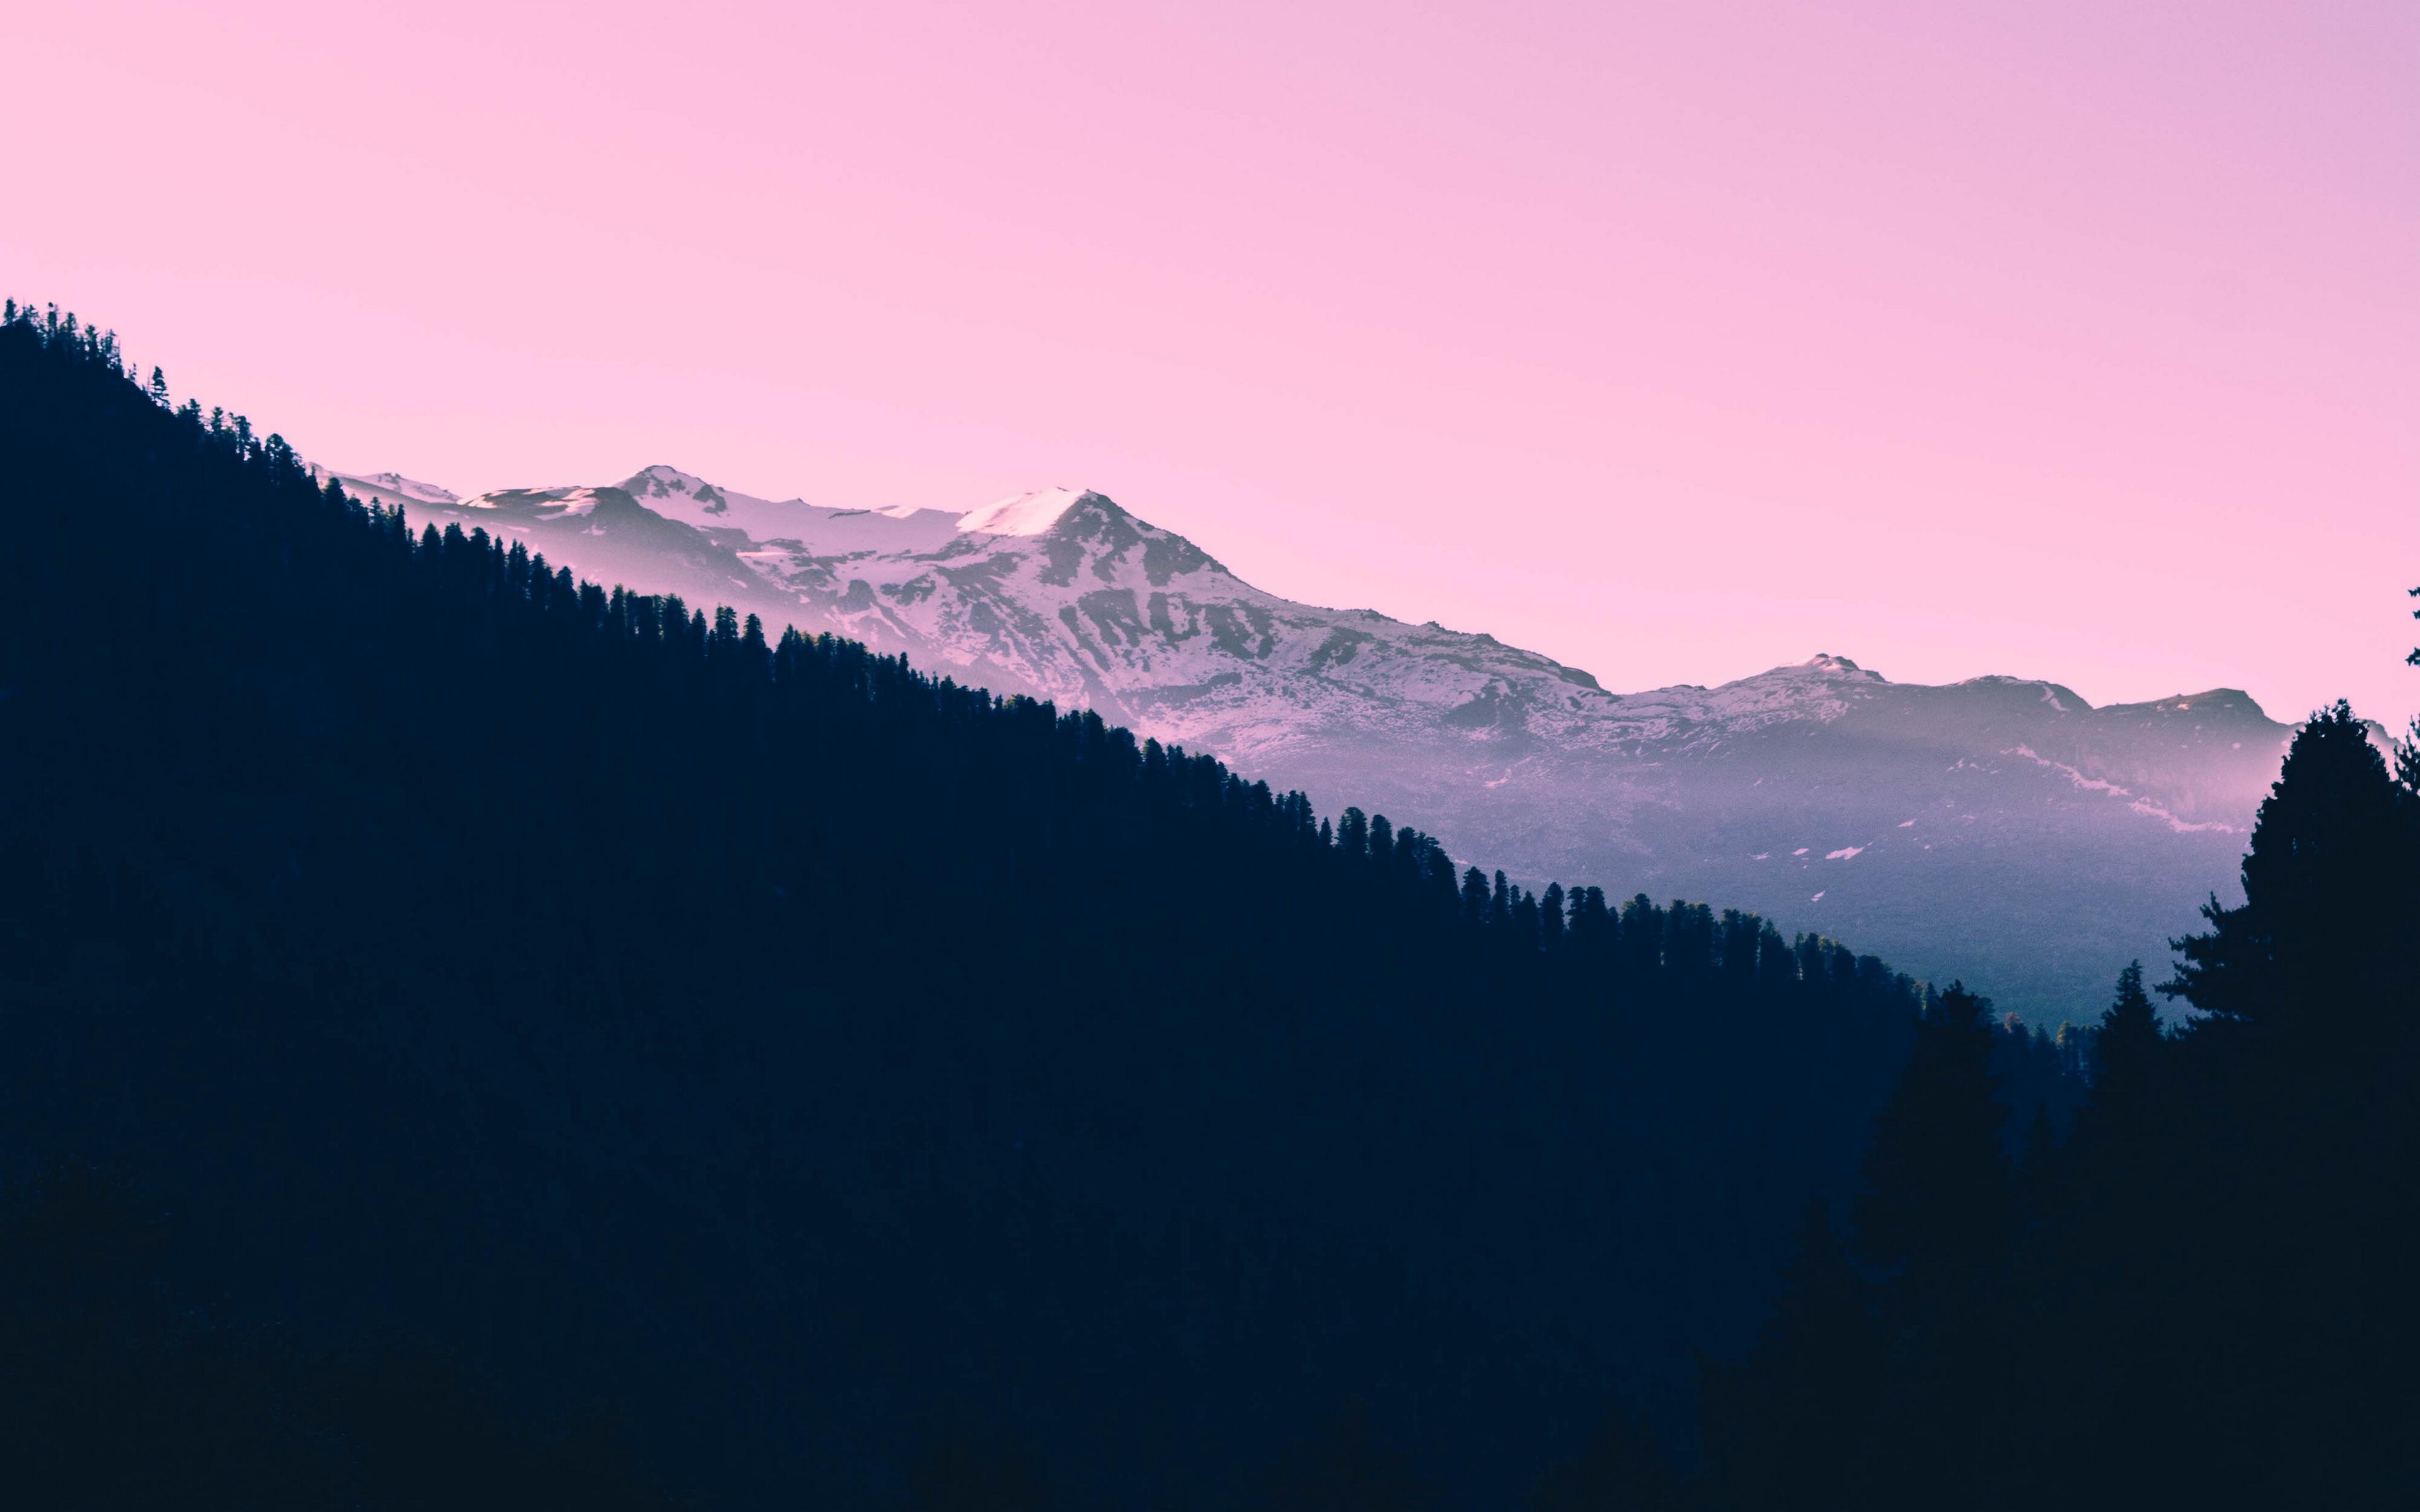 Download wallpaper 3840x2400 mountains, sunset, trees, sky